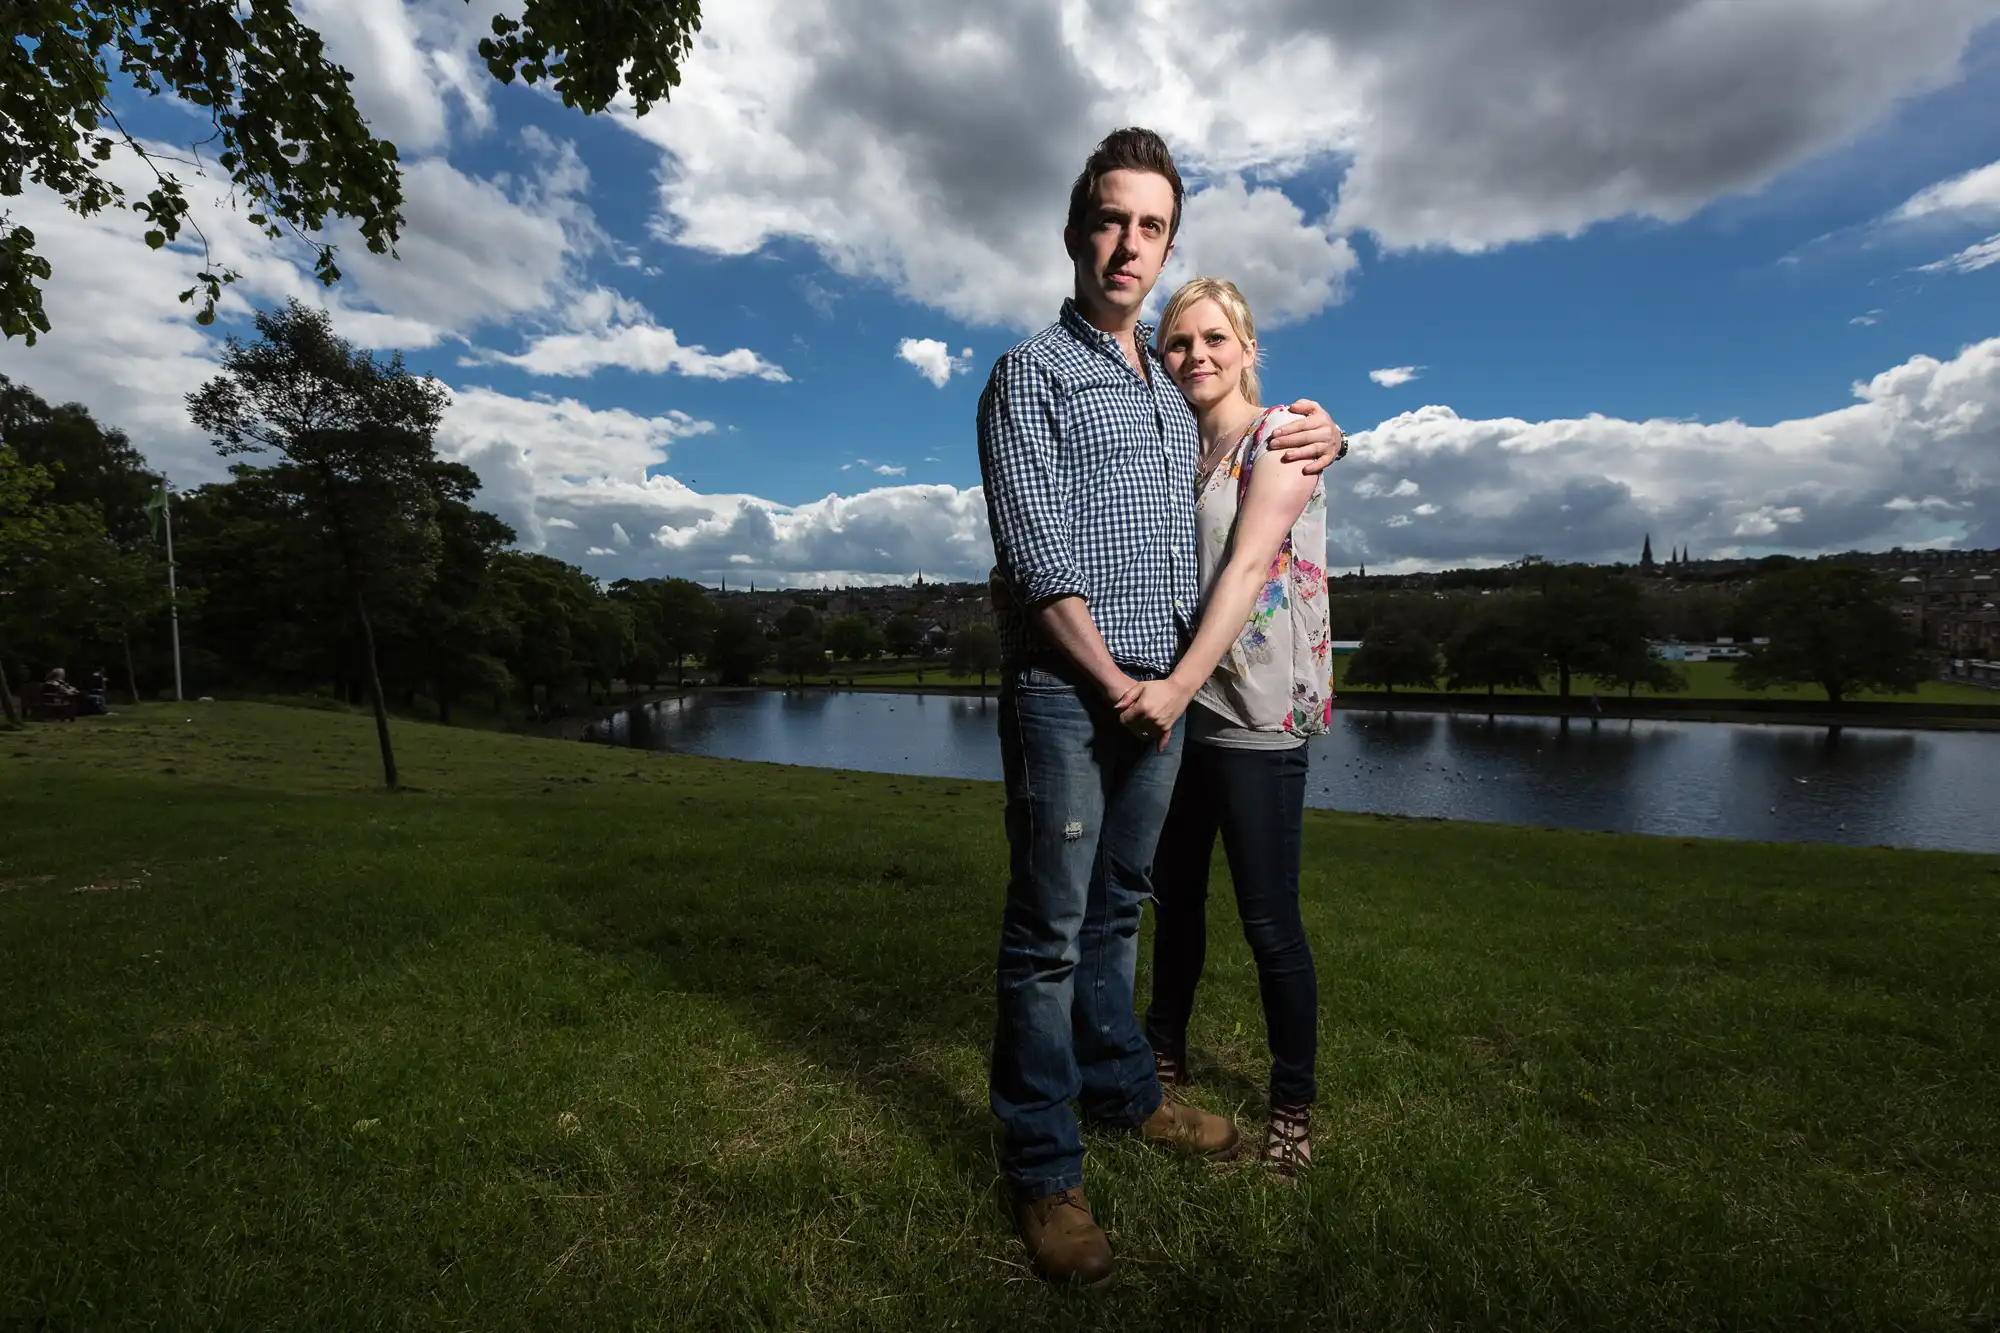 A couple embracing in a sunny park with a lake and distant cityscape in the background.